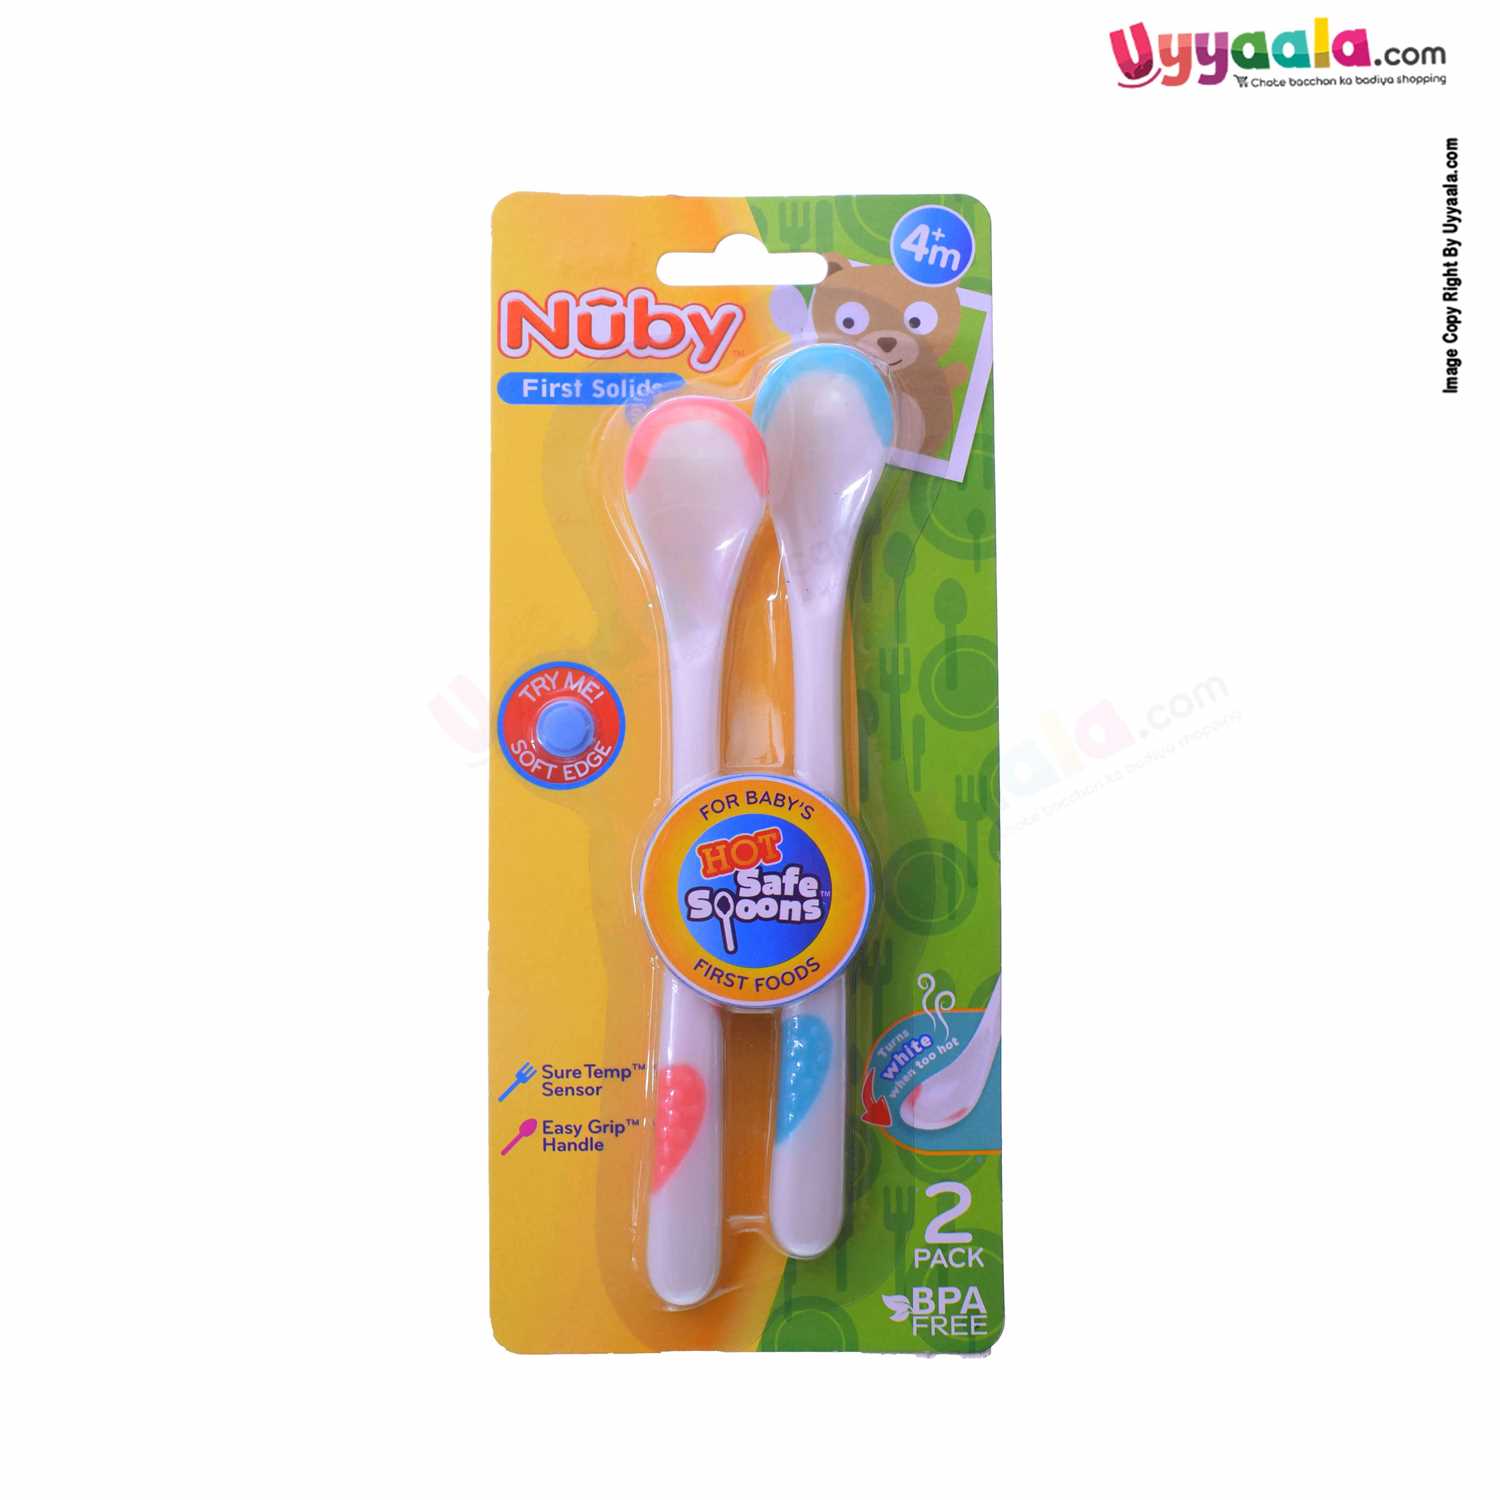 NUBY Hot safe spoons for babies first foods, Pack of 2 - Pink & Blue, 4+m